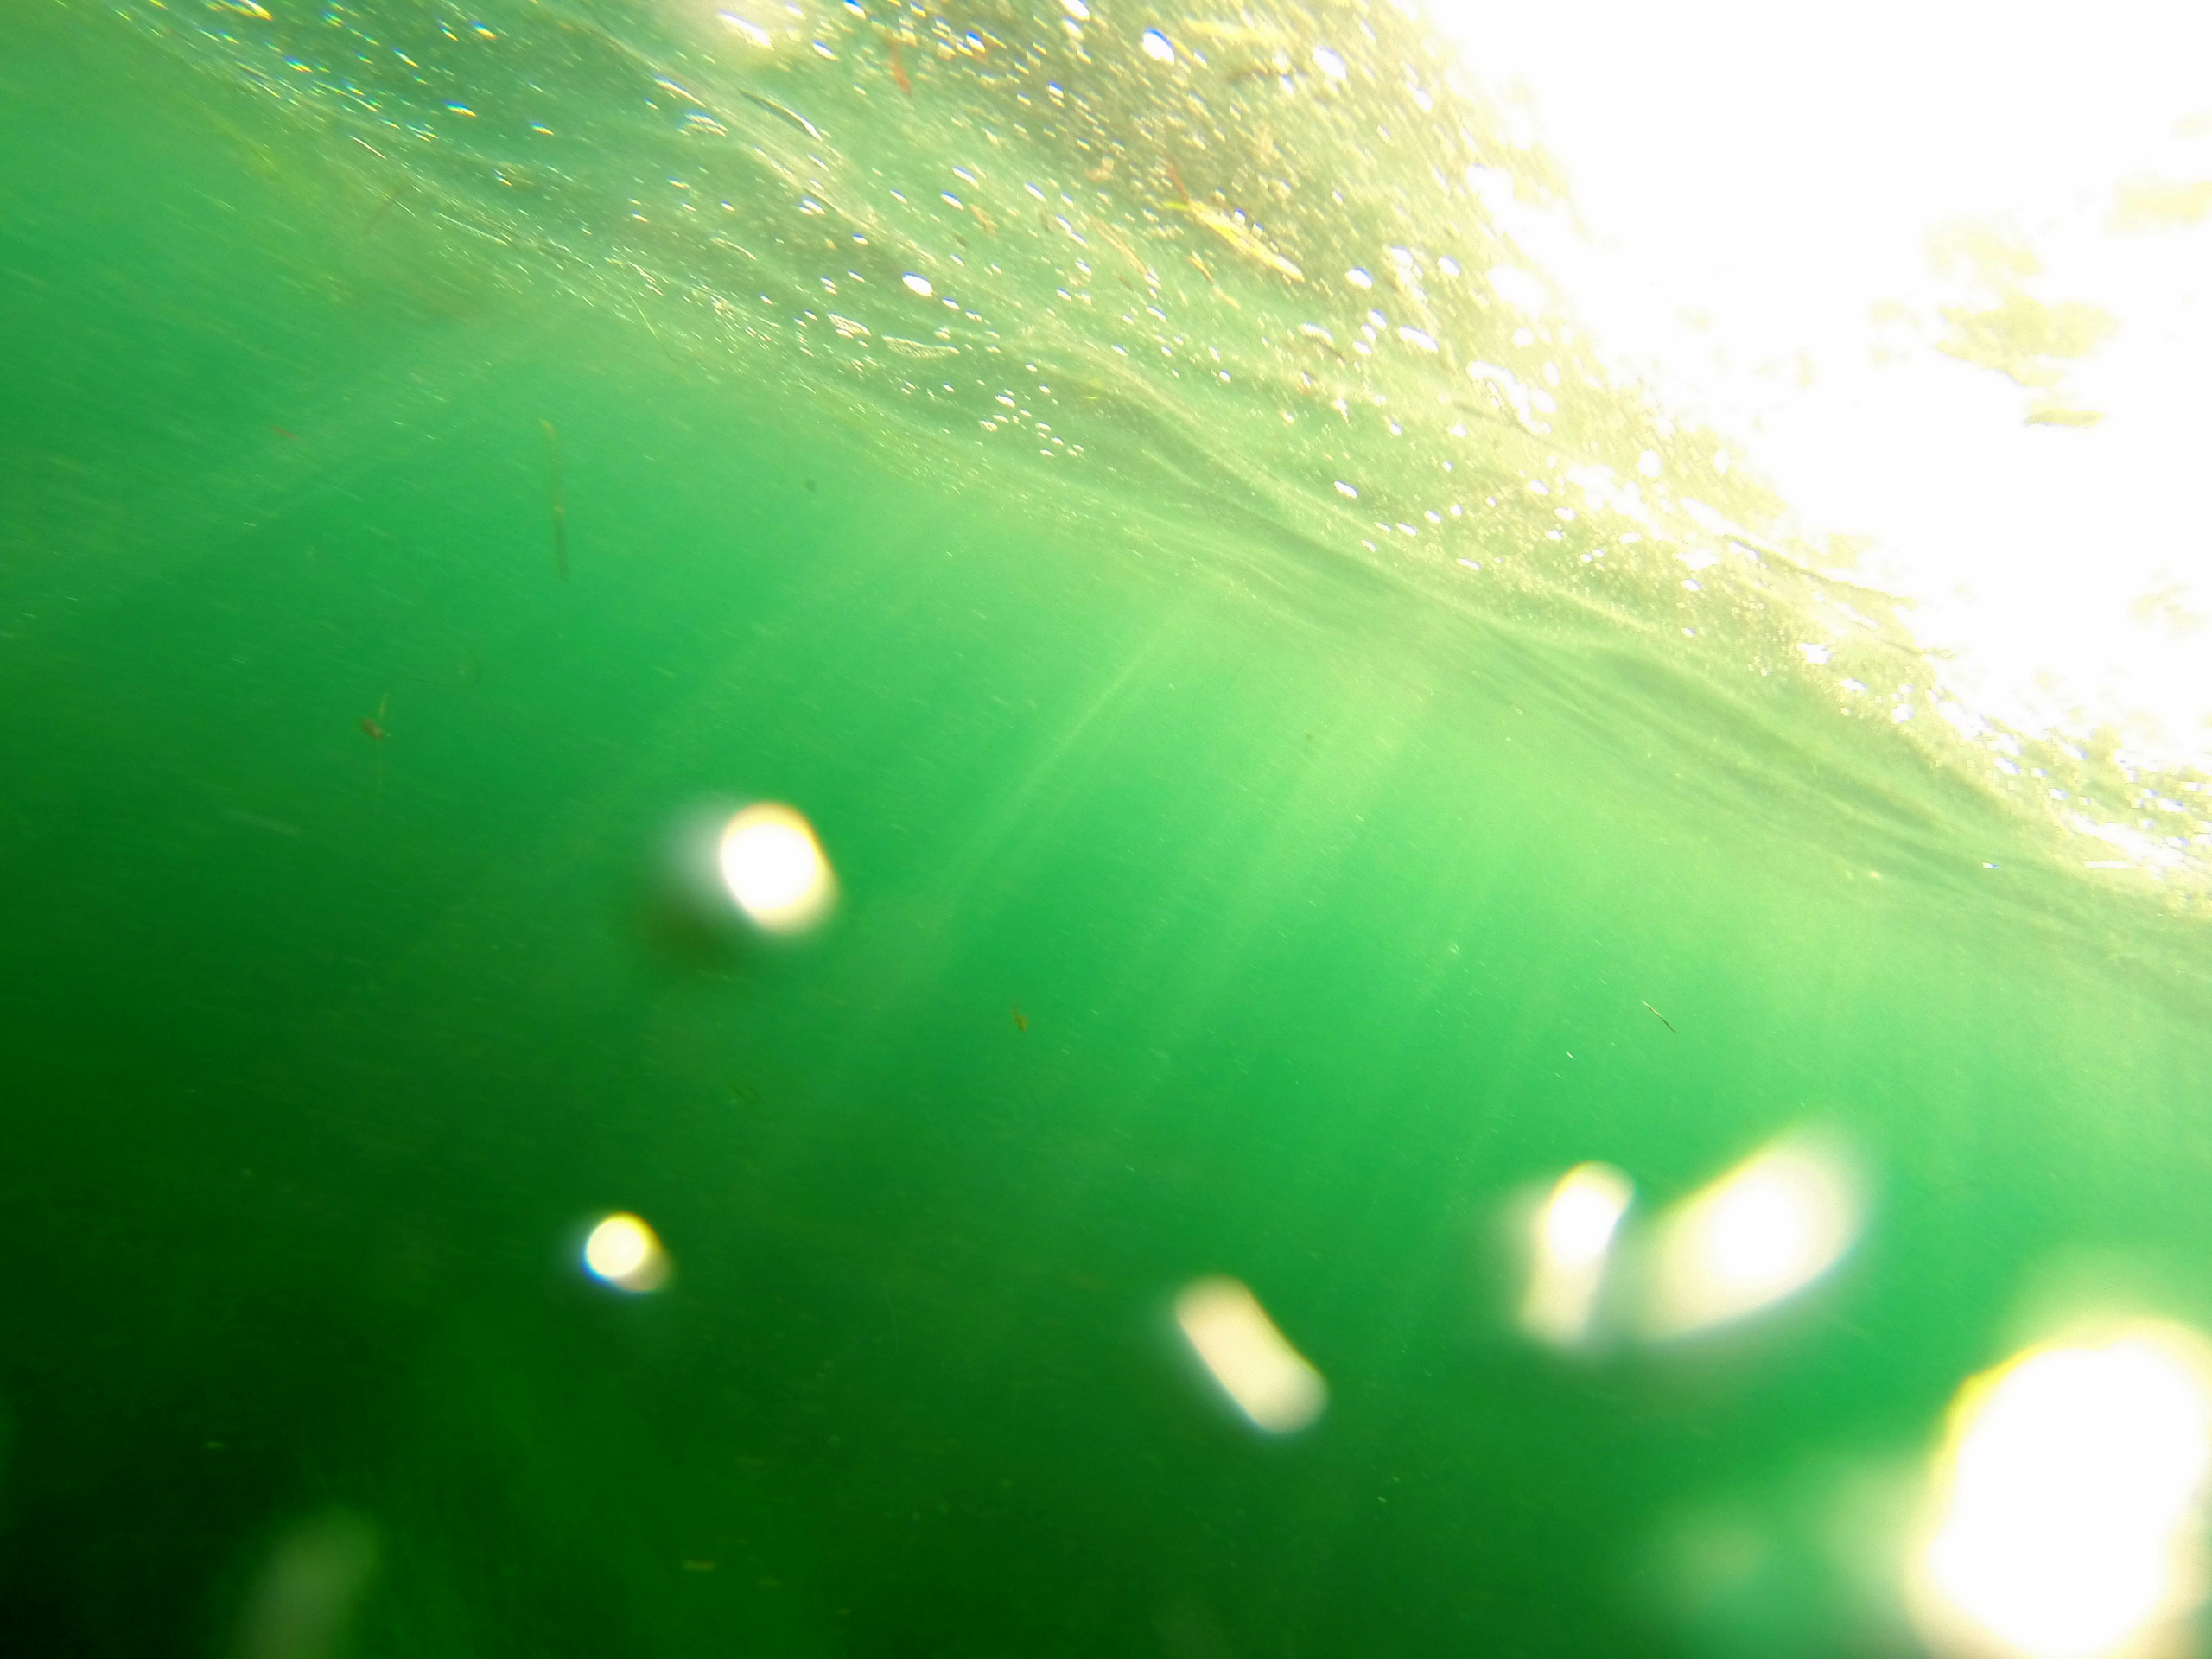 GoPro photo with camera just under surface off Newport Coast and looking up at sky through green water